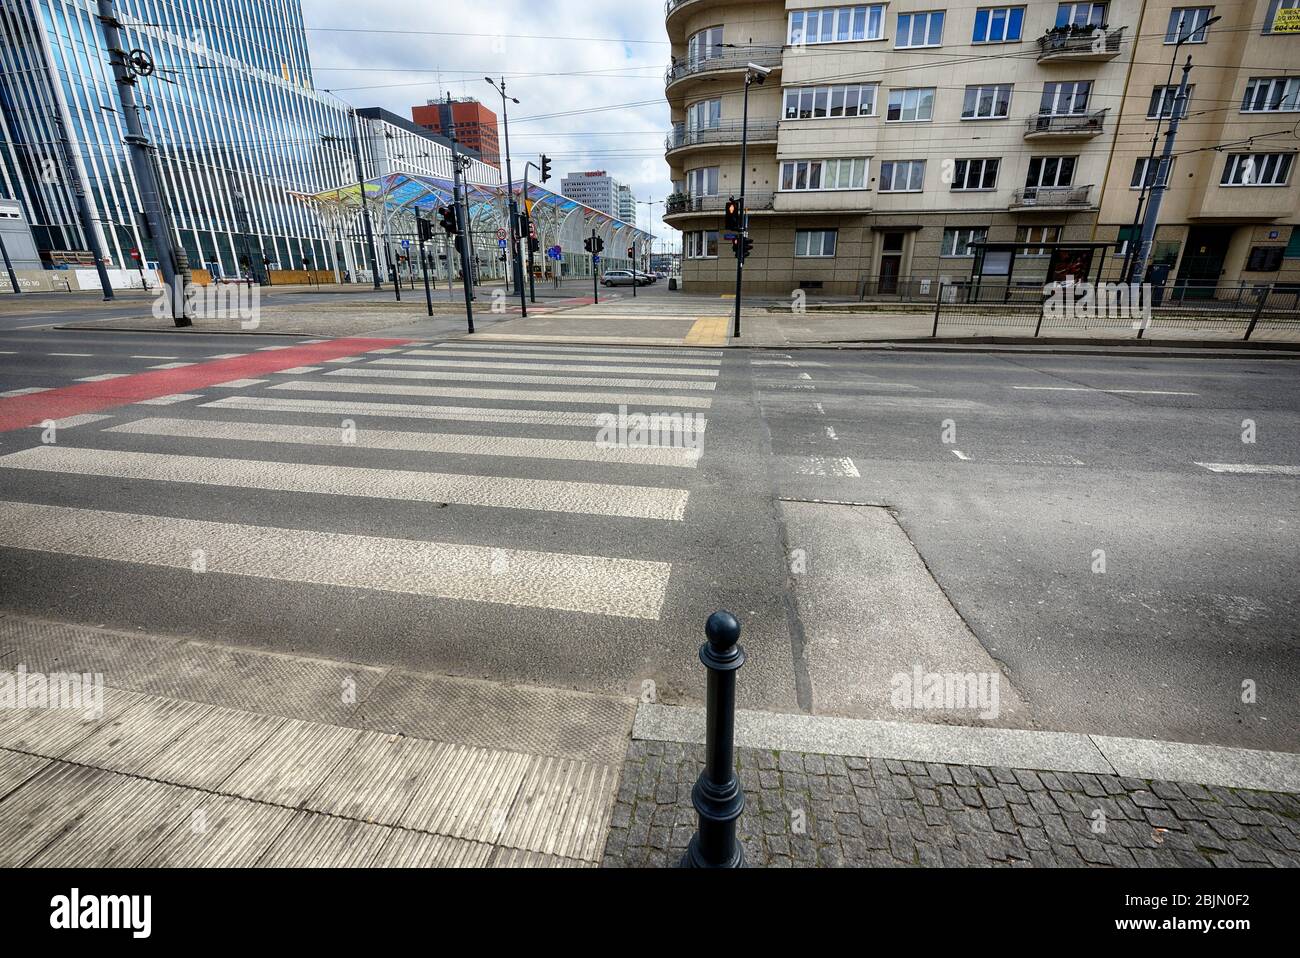 Europe, Poland, Lodz, March 2020, empty streets of city center during the coronavirus pandemic. Stock Photo